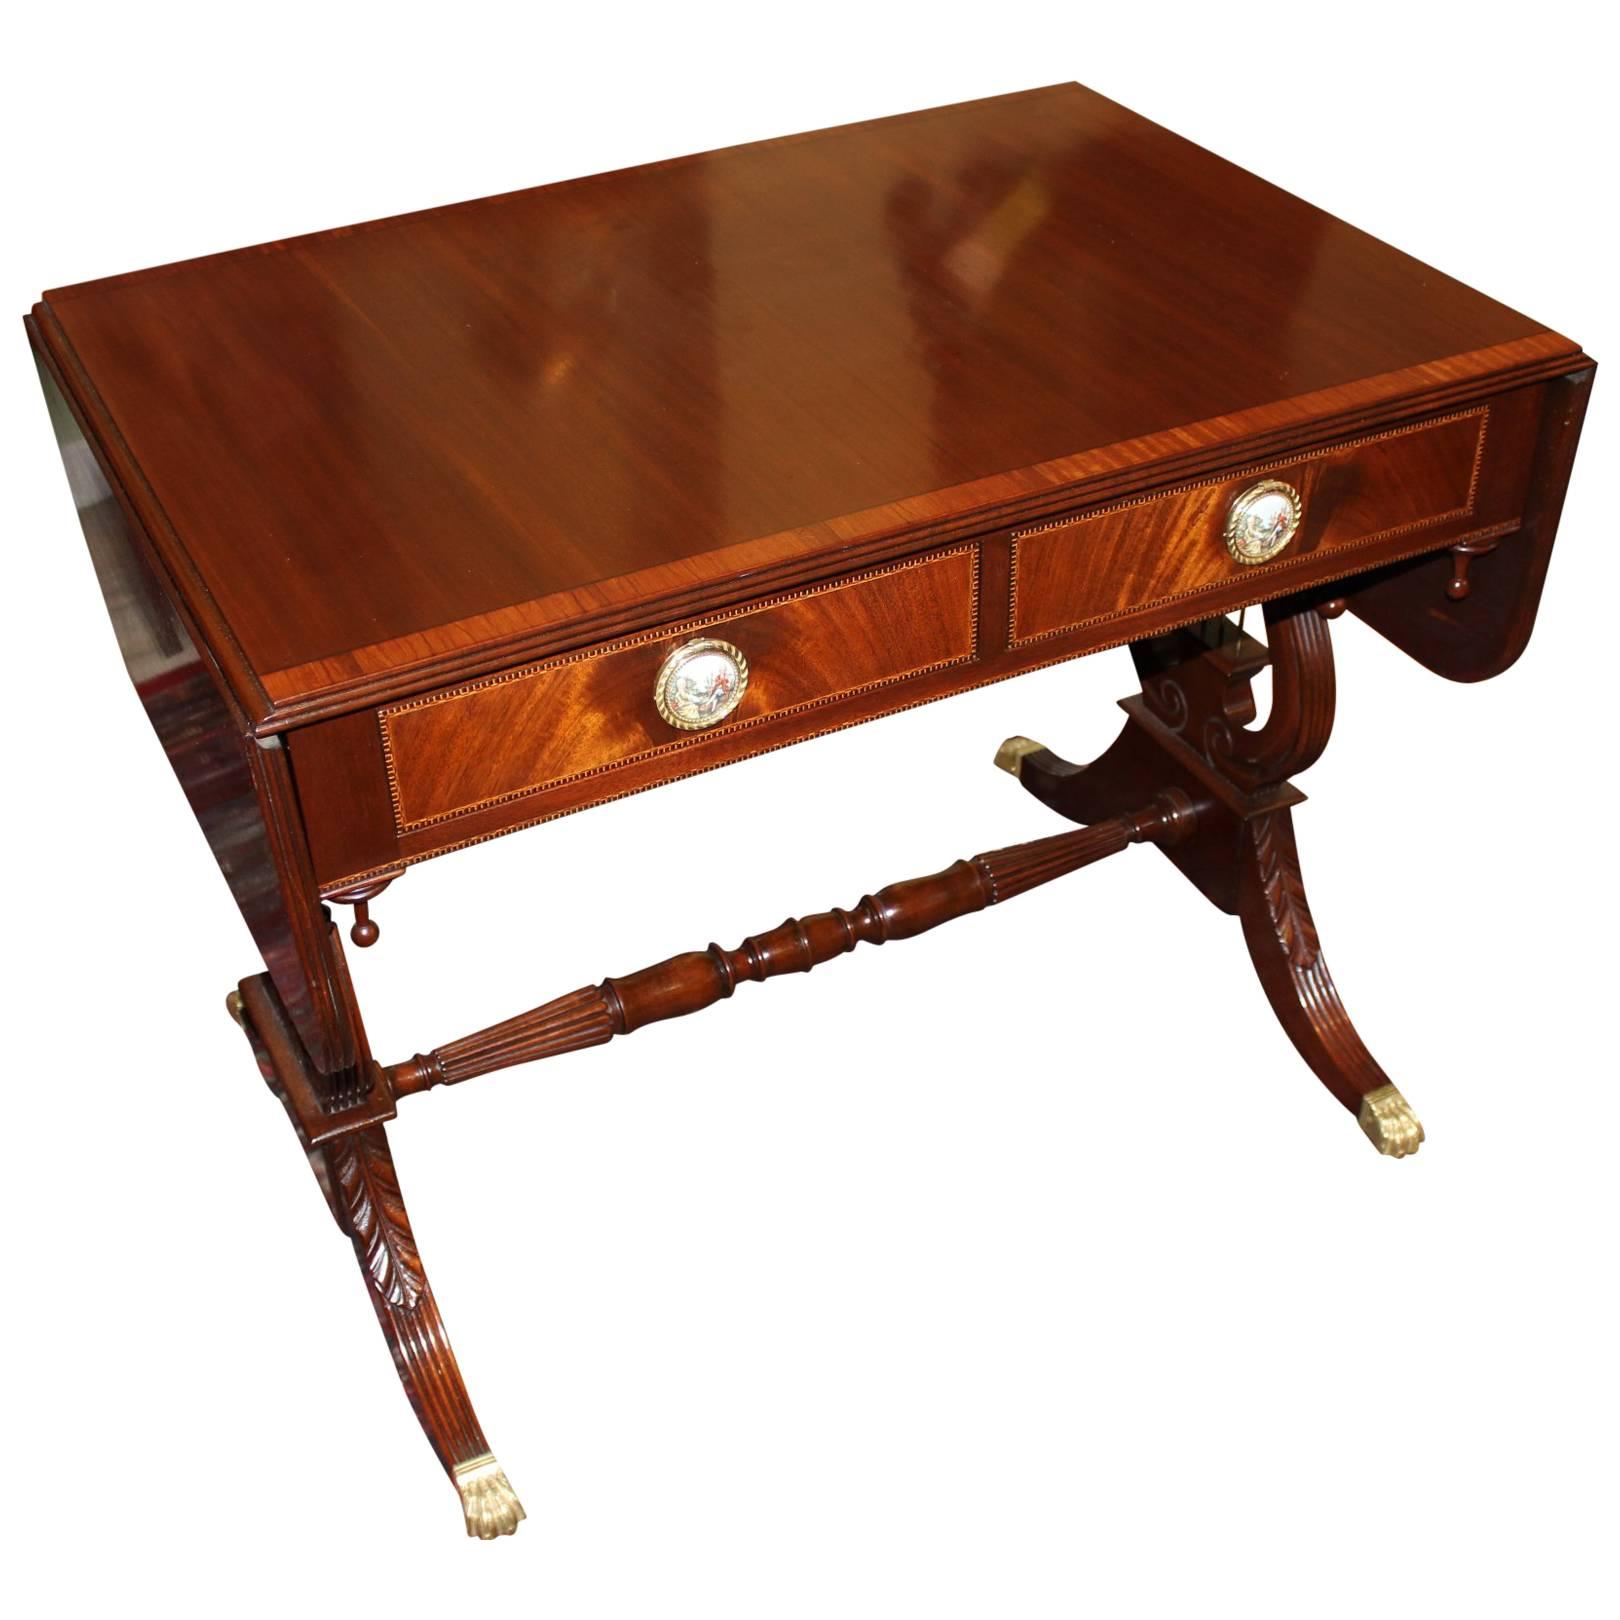 Regency Style Mahogany Lyre-Base Cabot Sofa Table by H. Saks & Sons